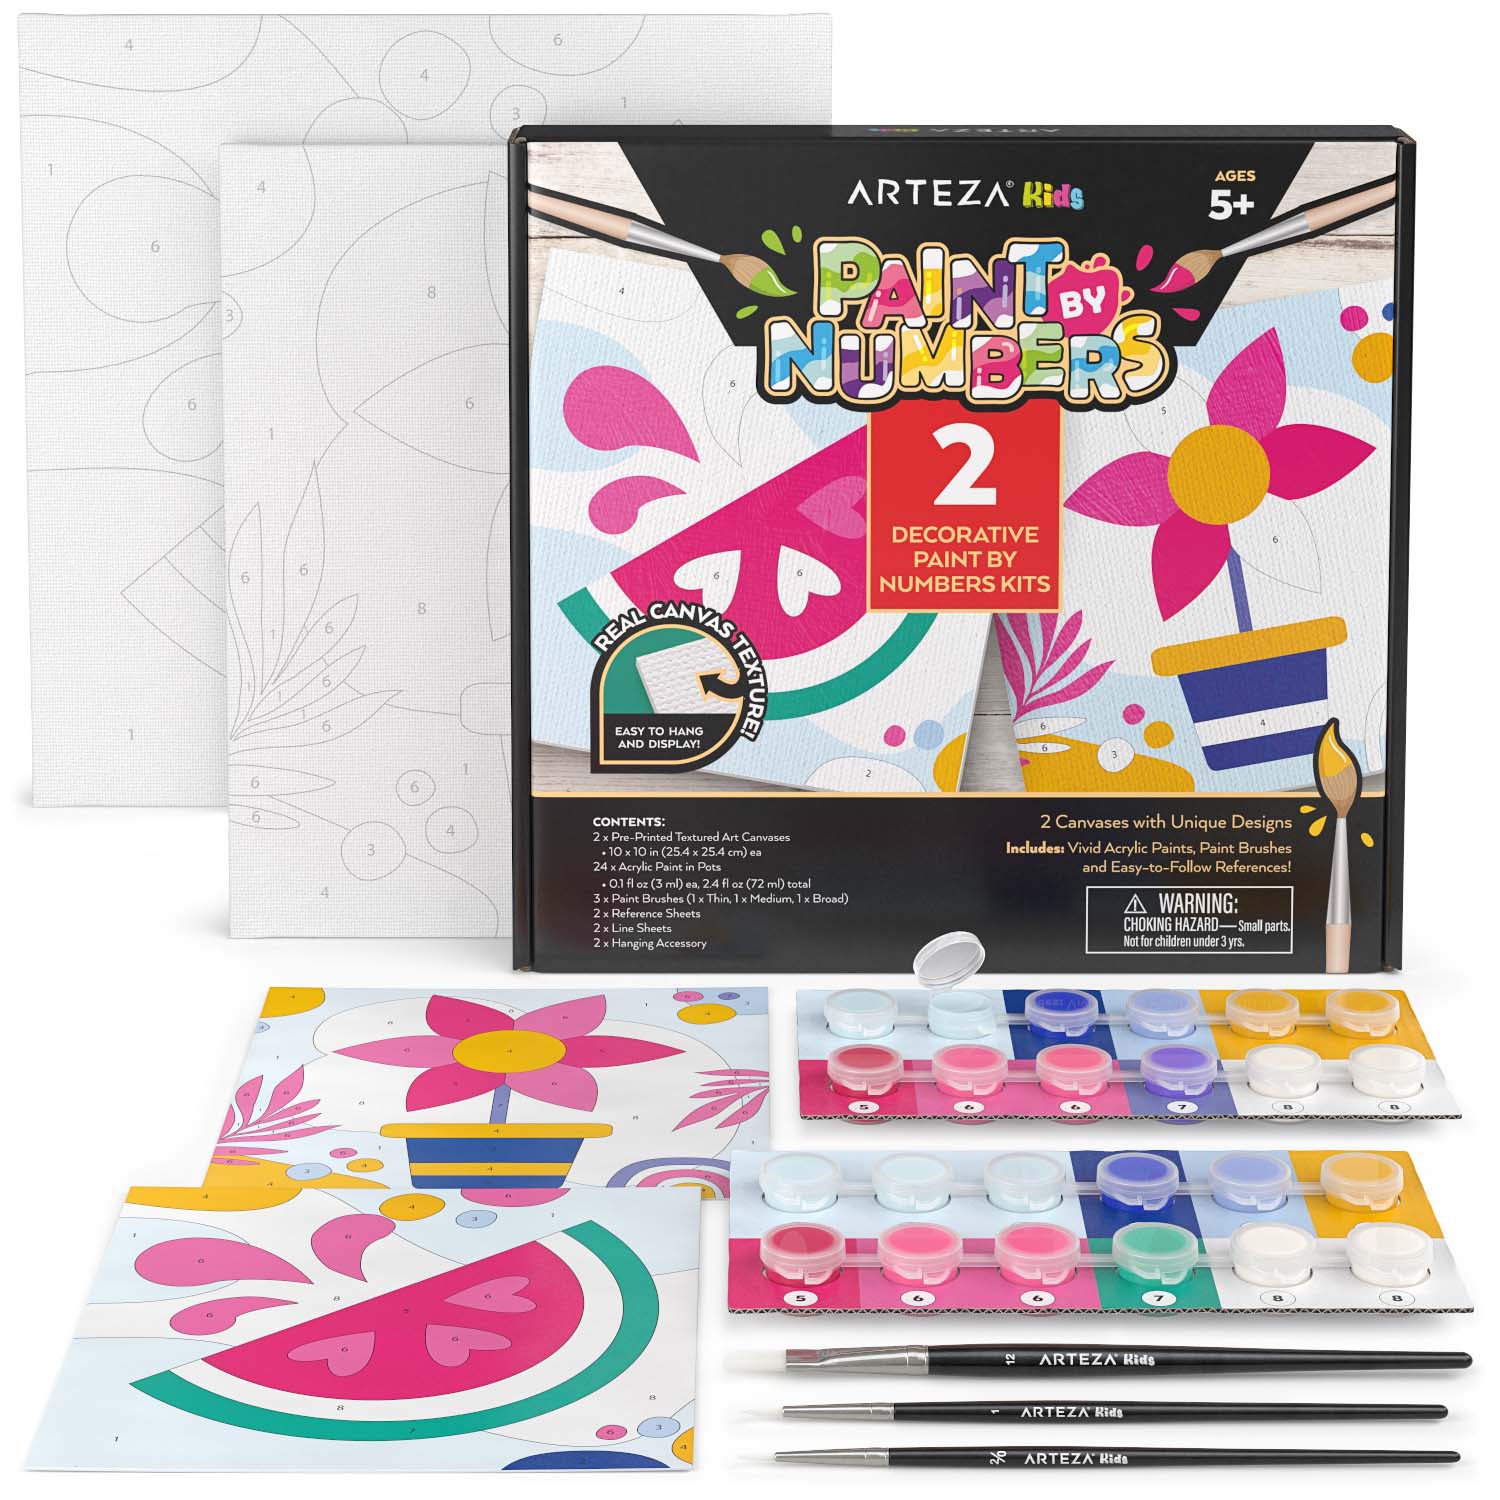  Pre-Framed Paint by Numbers Kit for Kids - Number Painting DIY  Craft Kits - 16x12 Inch Acrylic Oil Painting Set On Canvas for Boy, Girl,  Beginners, Colorful Sea Turtle : Arts